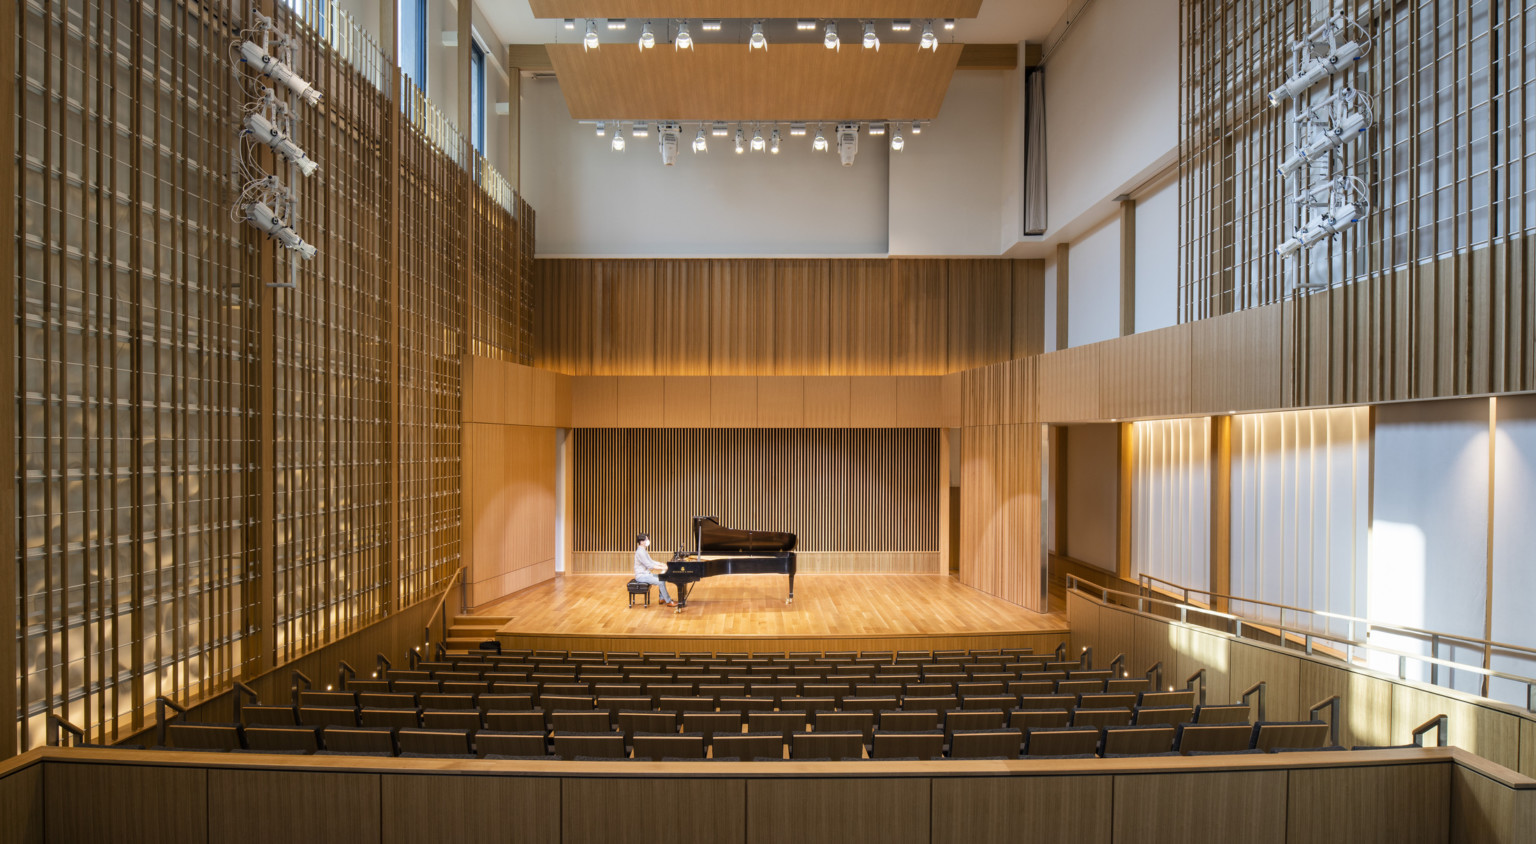 Man sitting at piano in double height recital room auditorium with theater seating. Wood panel designs on walls and wood acoustic panel